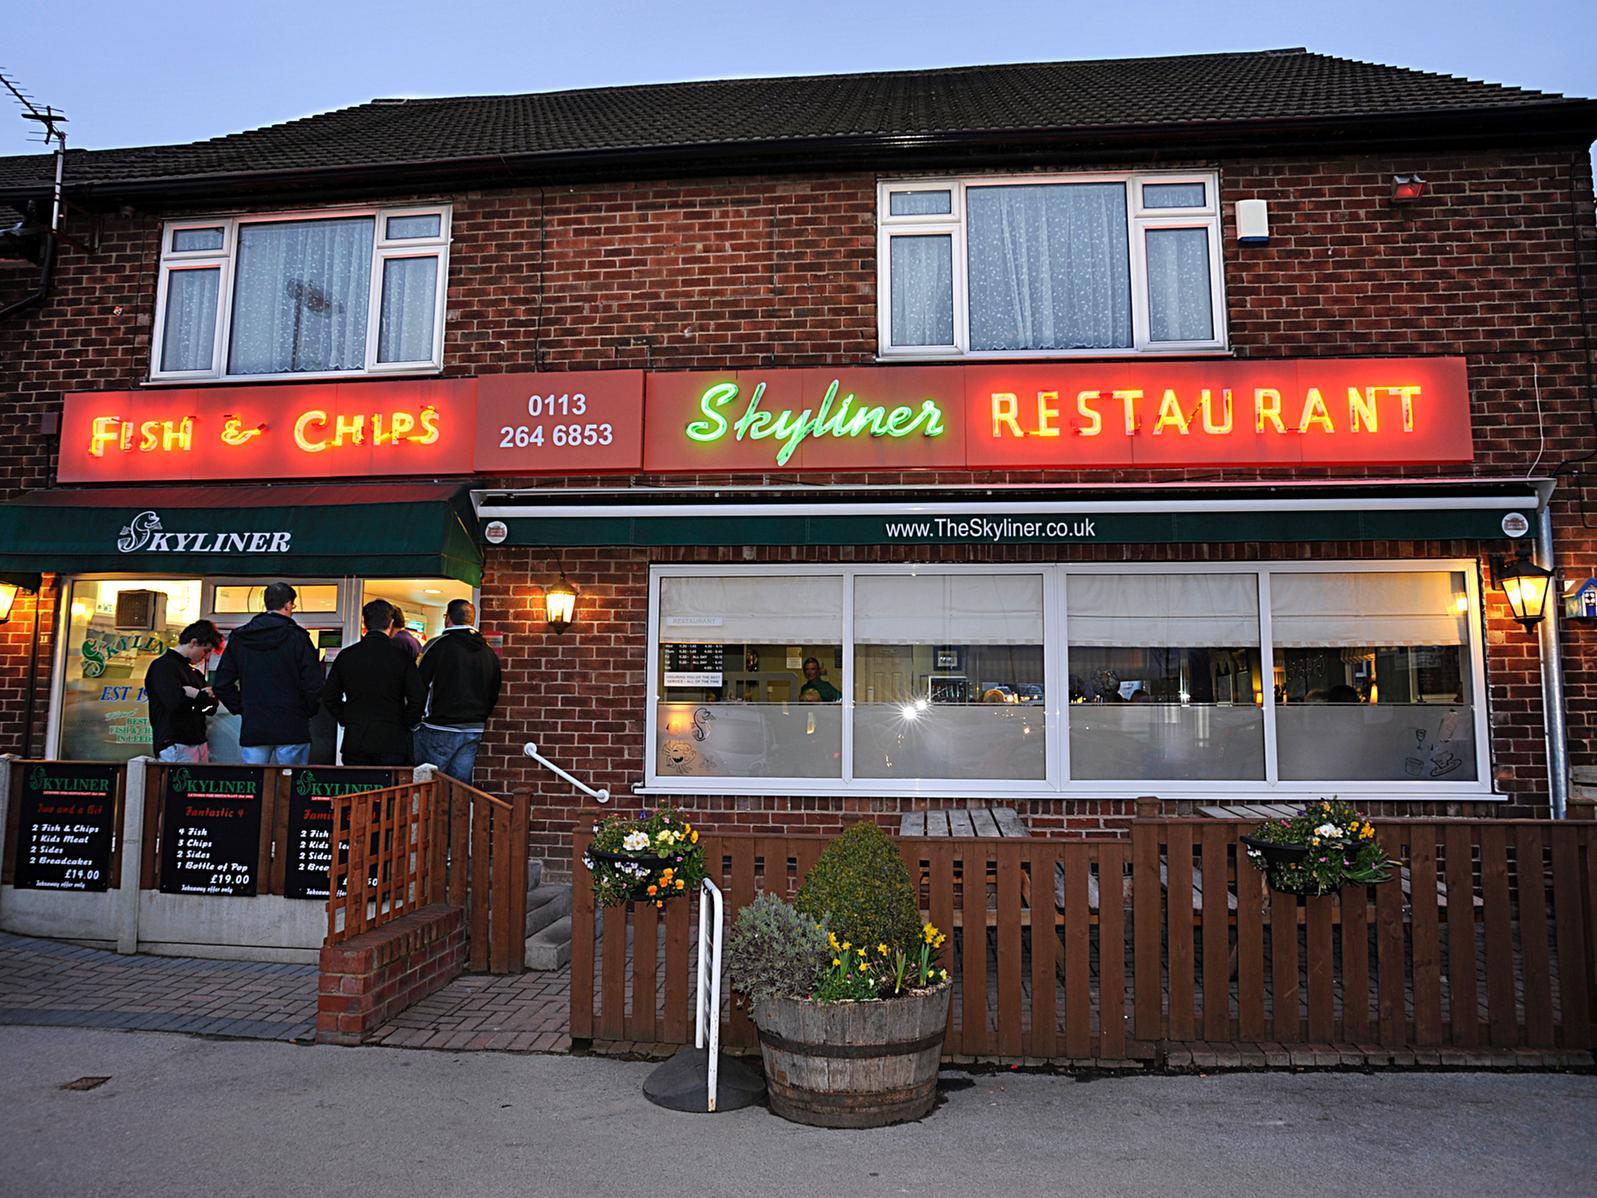 The popular Skyliner Fish & Chip Restaurant in Austhorpe came fifth on the list.